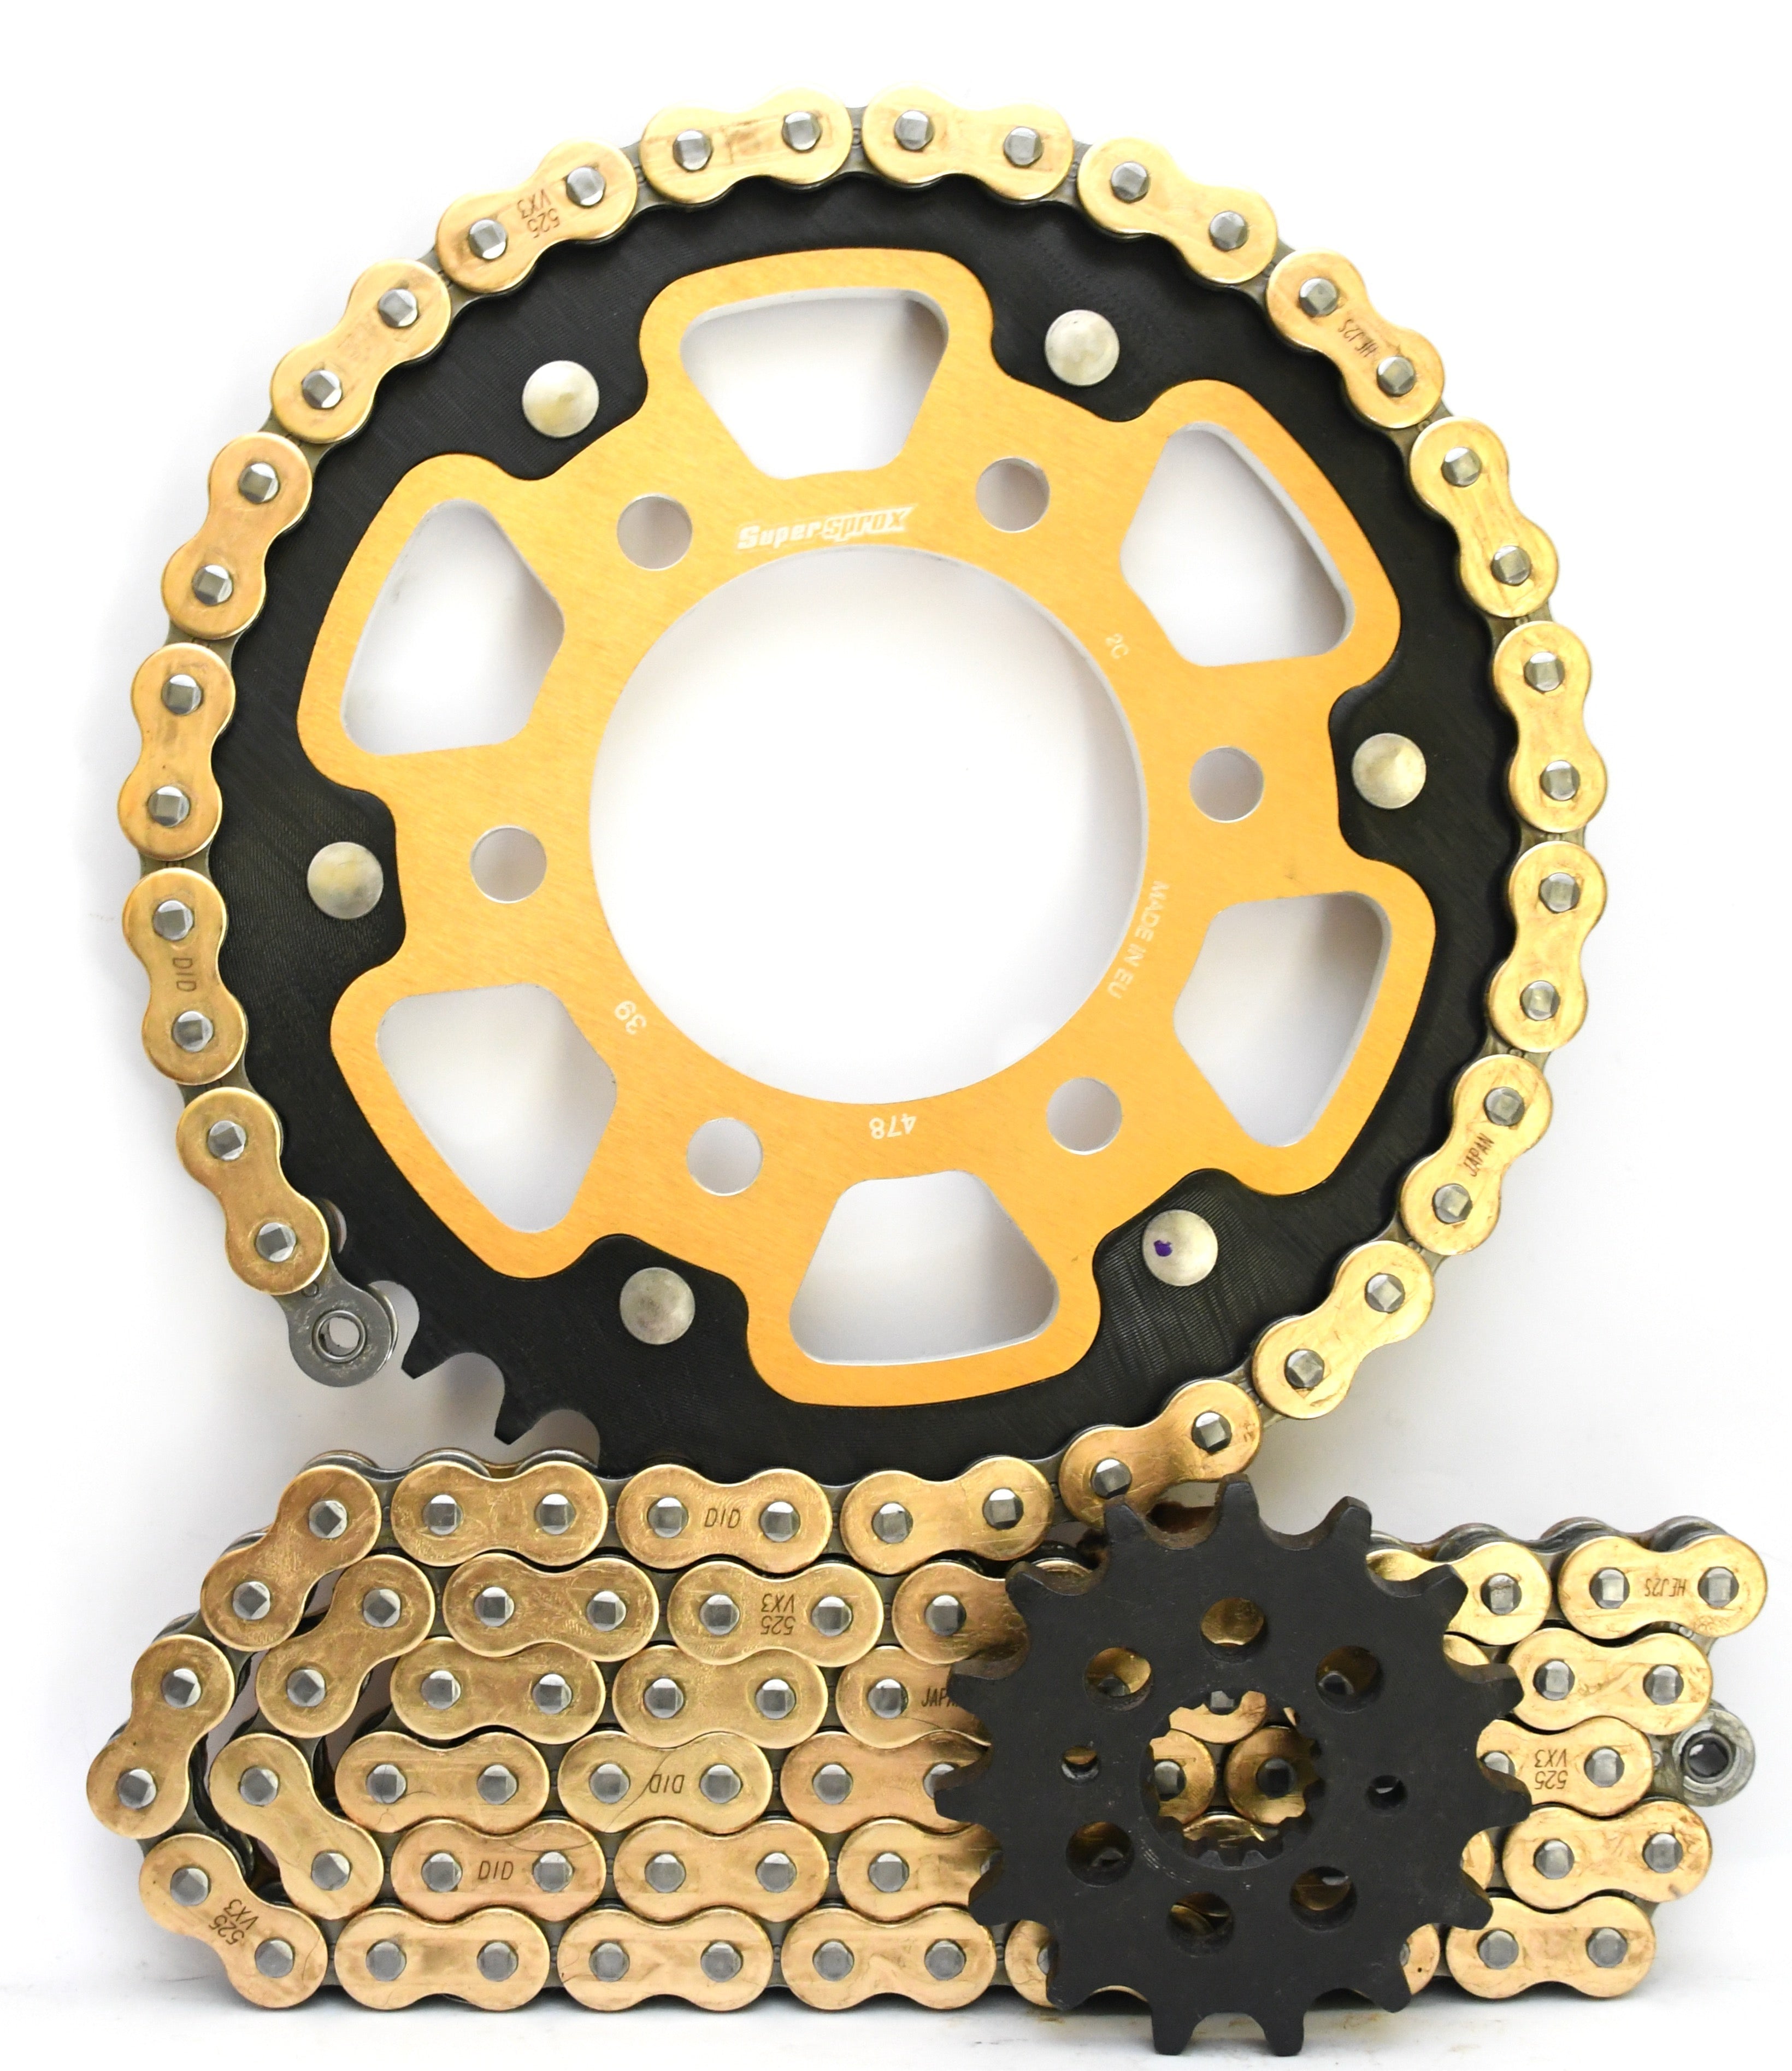 Supersprox Stealth and DID 520 Conversion Chain & Sprocket Kit for Kawasaki ZX-10R 2021> - Standard Gearing